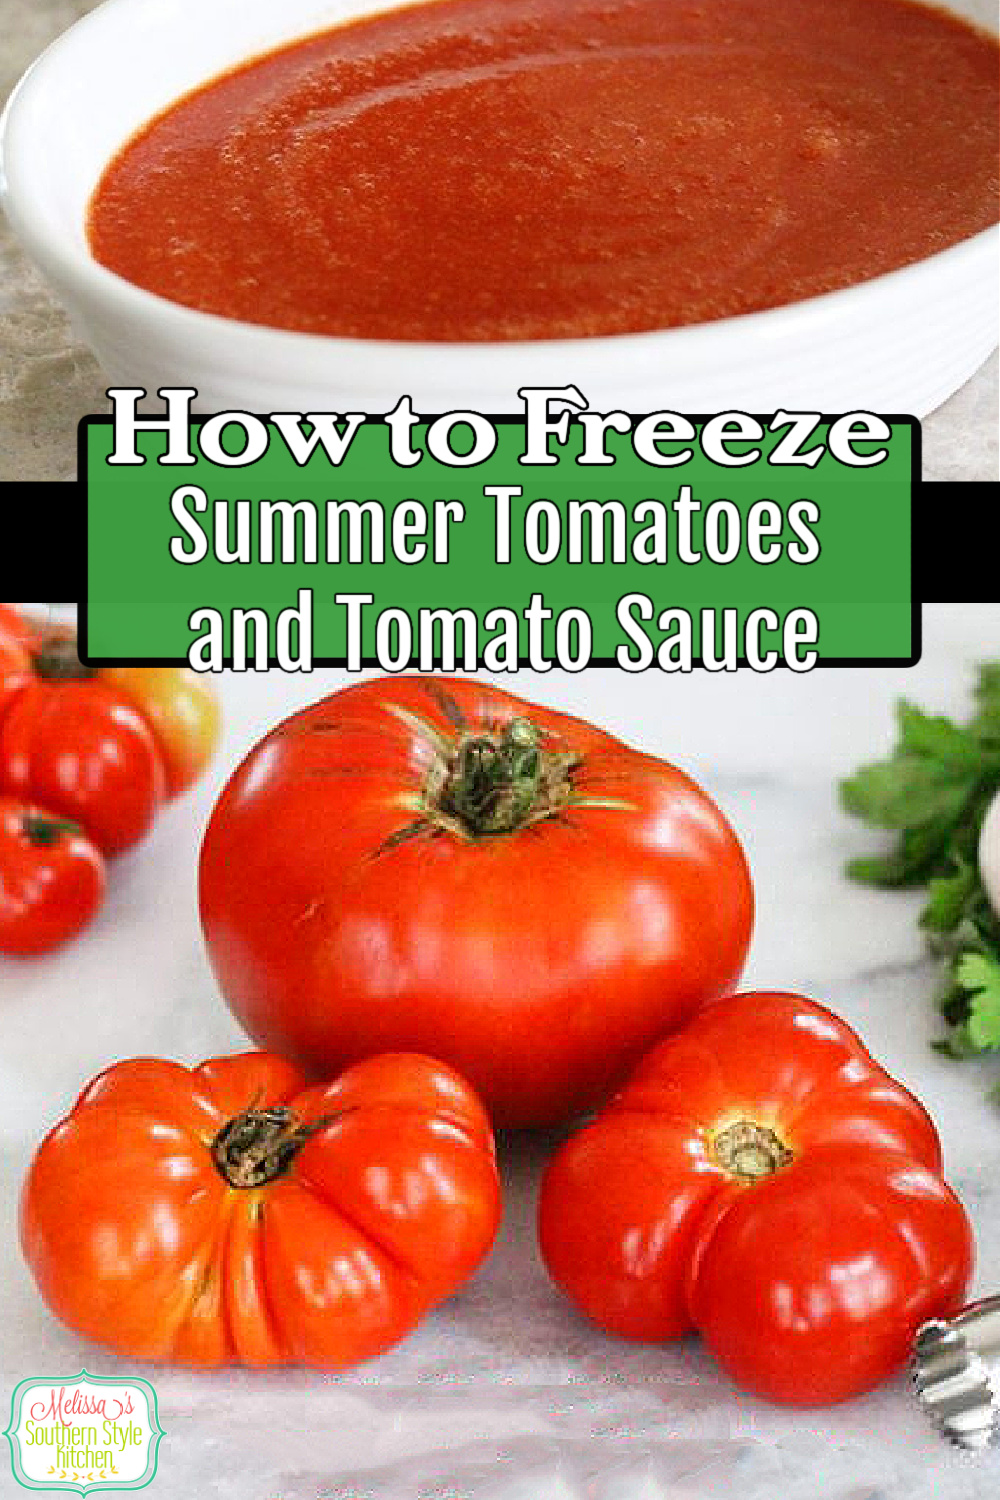 Get the skinny on how to freeze summer tomatoes and make homemade tomato sauce #tomatoes #freezingtomatoes #preservingfood #tomatosauce #homemadetomatosauce #tomatorecipes #freshtomatoes #southernfood #southernrecipes